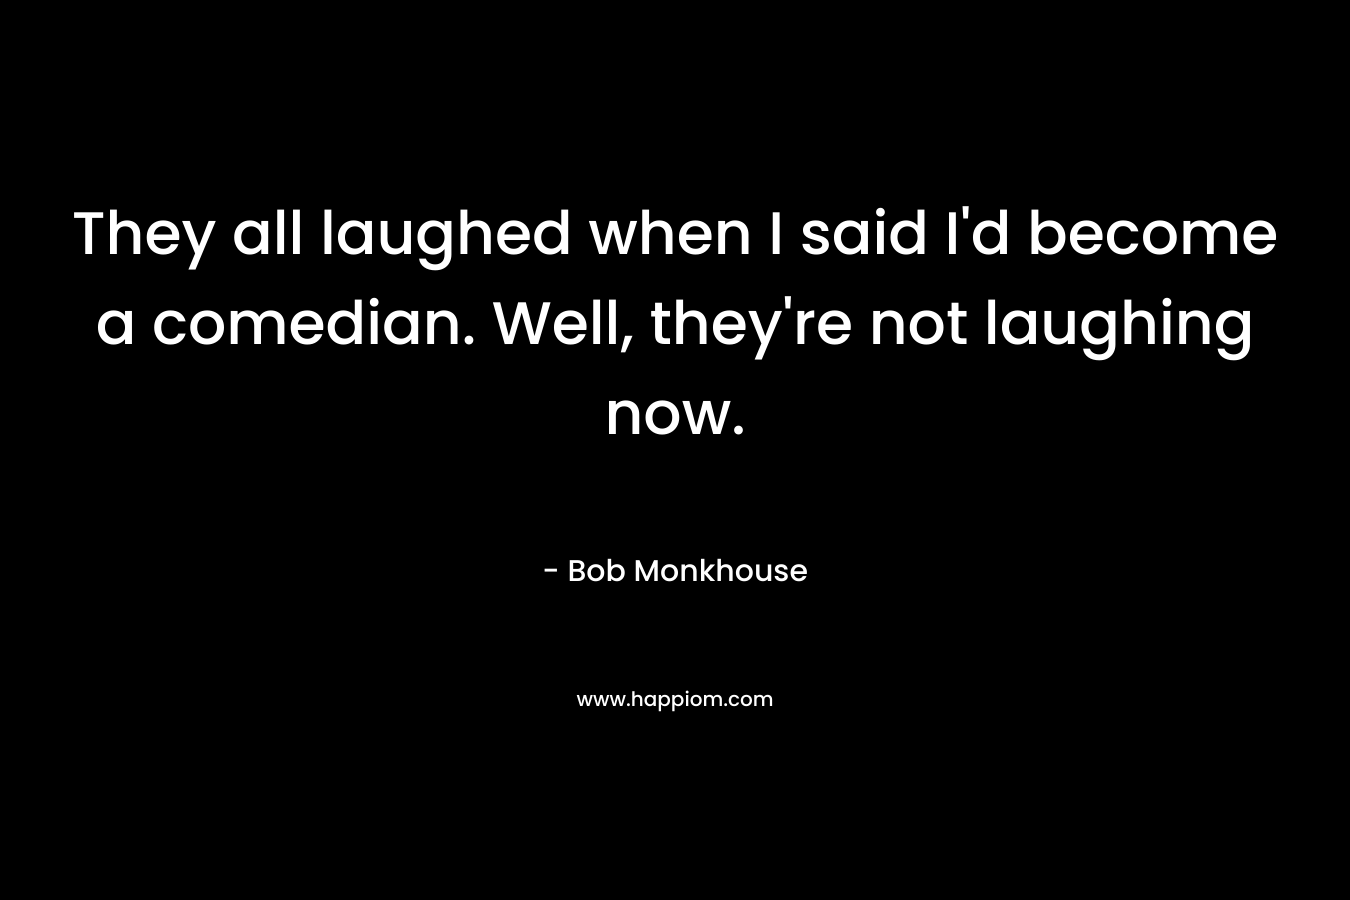 They all laughed when I said I’d become a comedian. Well, they’re not laughing now. – Bob Monkhouse